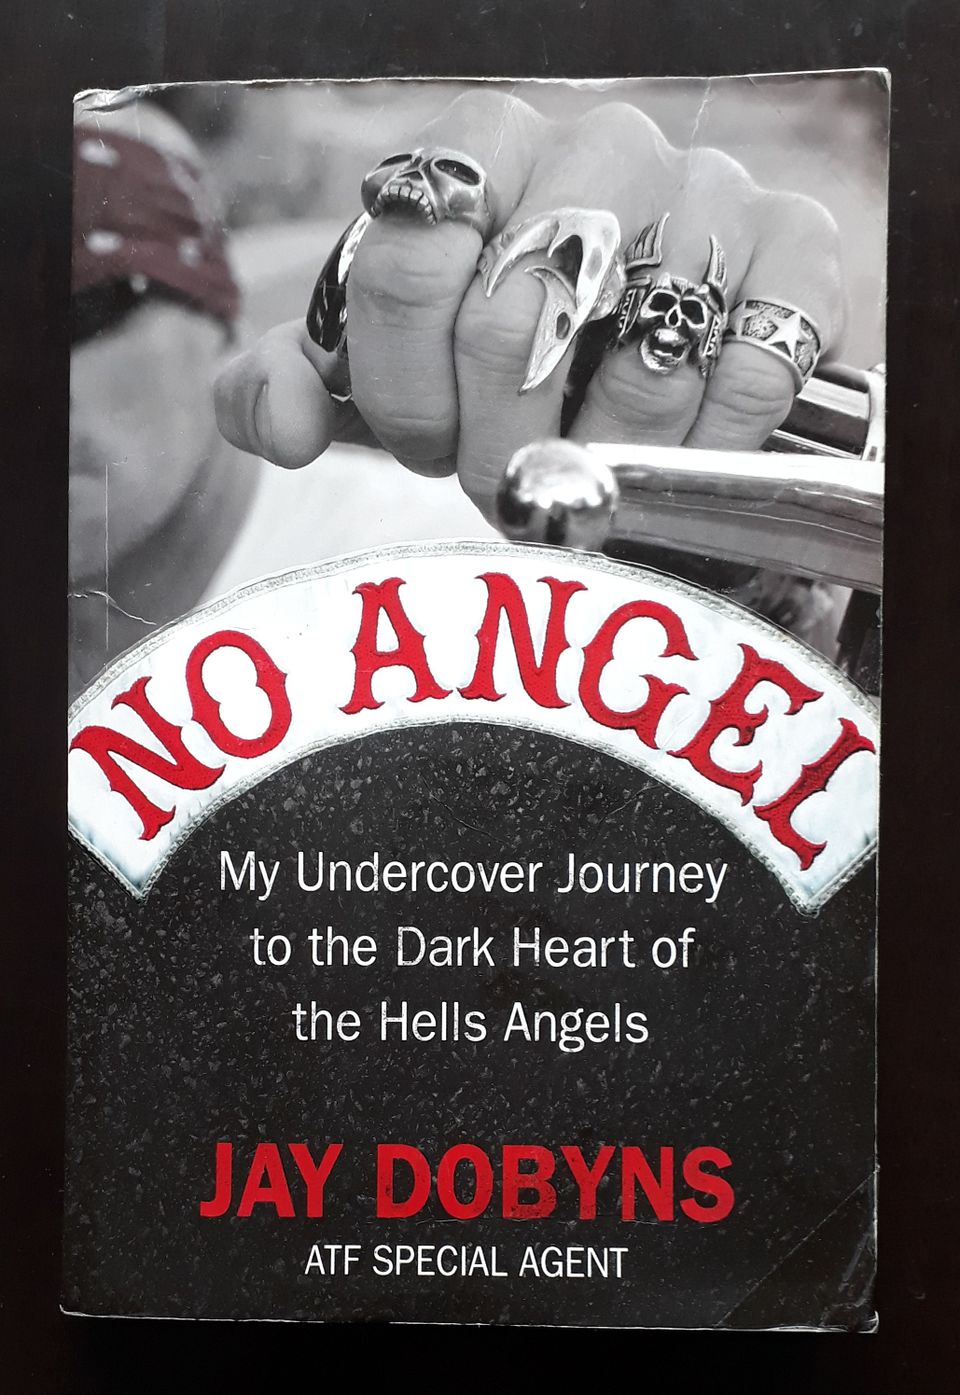 No Angel - Journey to the Inner Circle of the Hells Angels